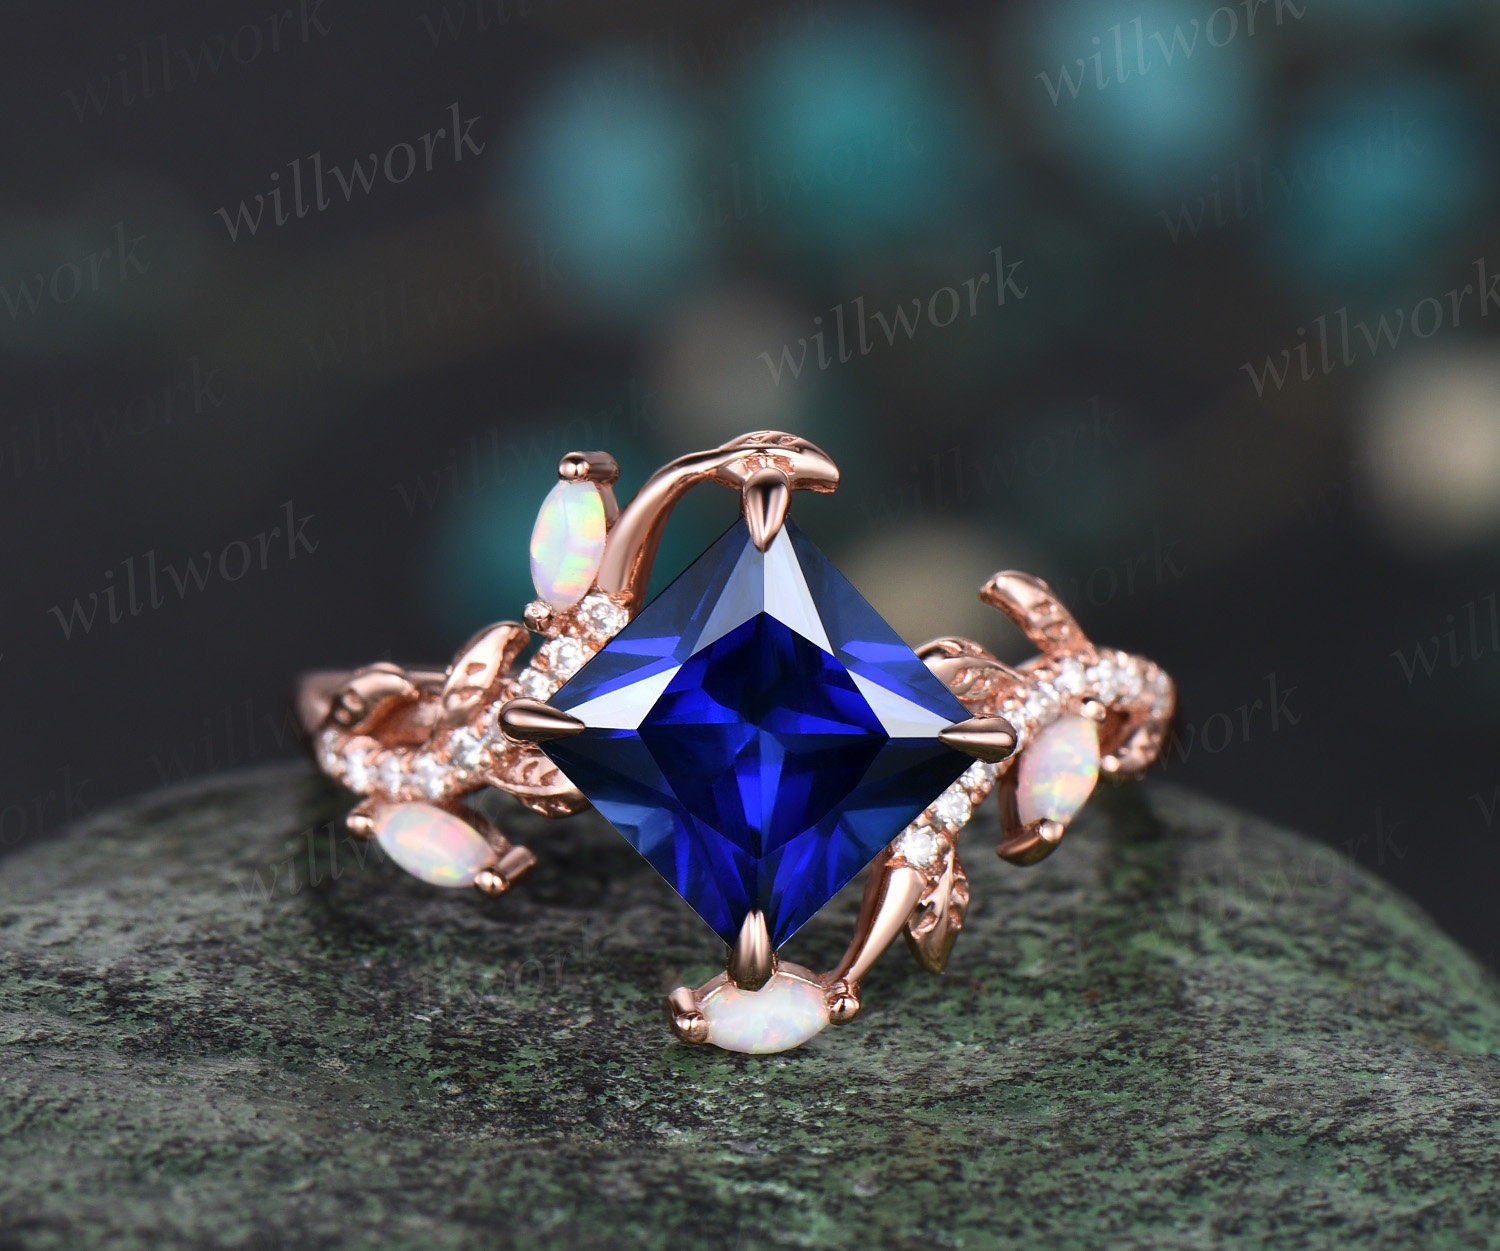 Radiant Cut Lab Created Blue Sapphire & Moissanite Ring in 14K White Gold